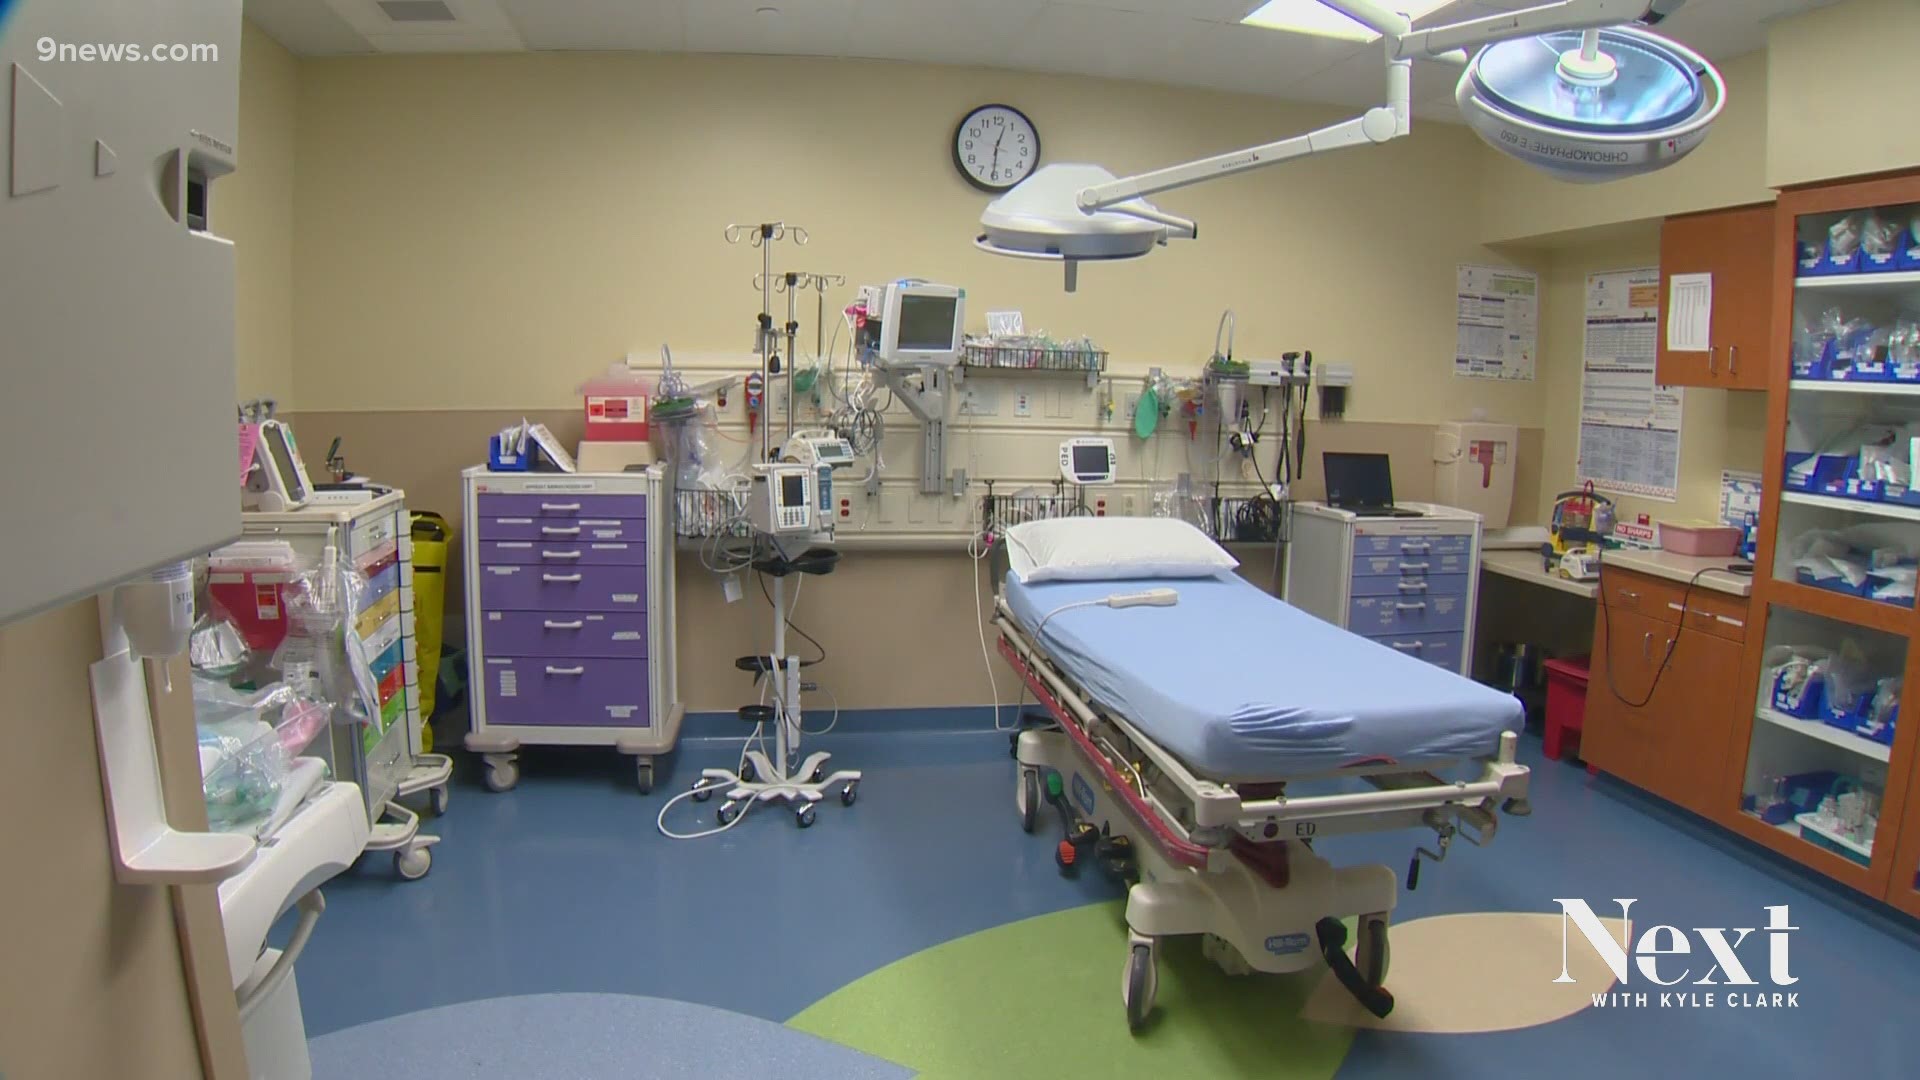 COVID hasn't left, the pandemic isn't over and hospitals are still treating COVID patients. But Denver emergency room doctors say vaccines have changed the game.